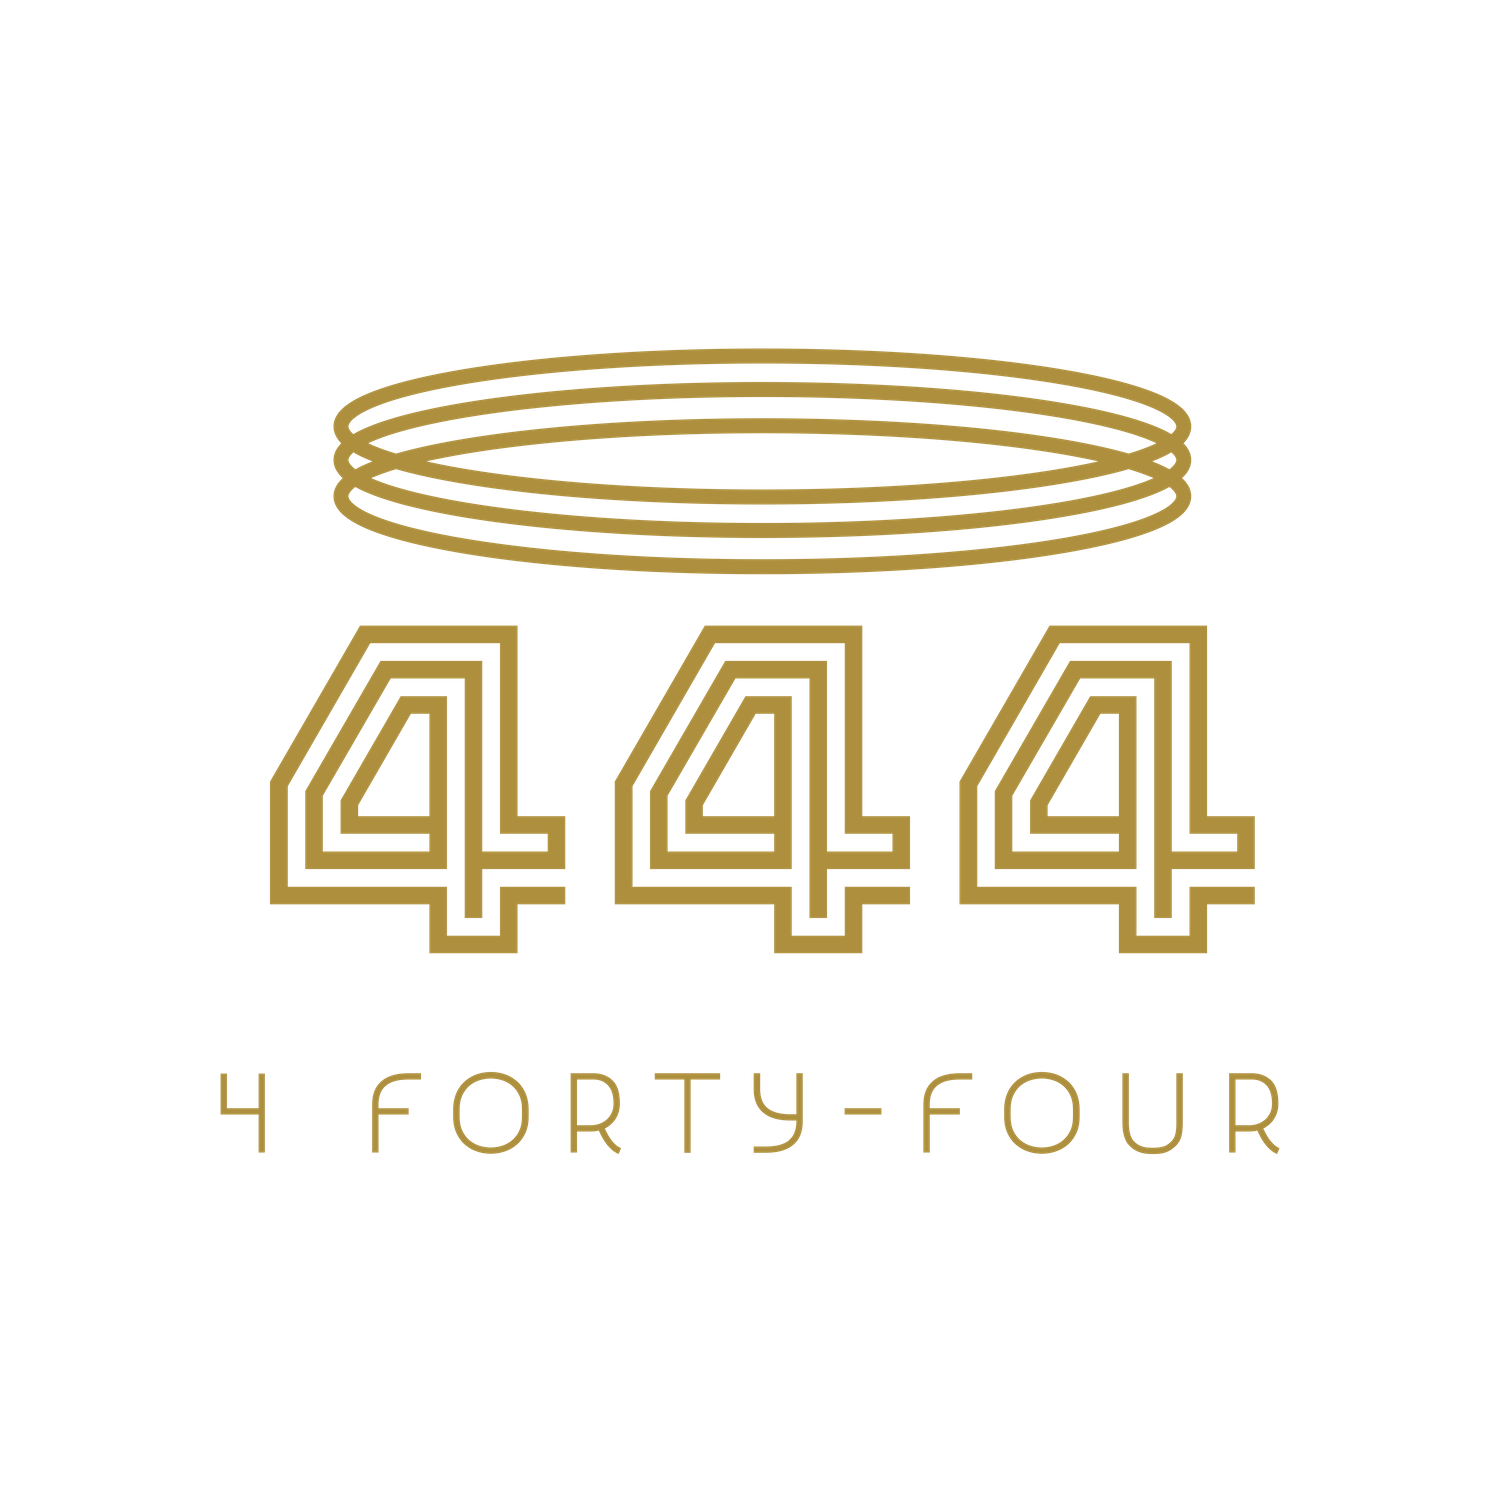 4Forty-Four